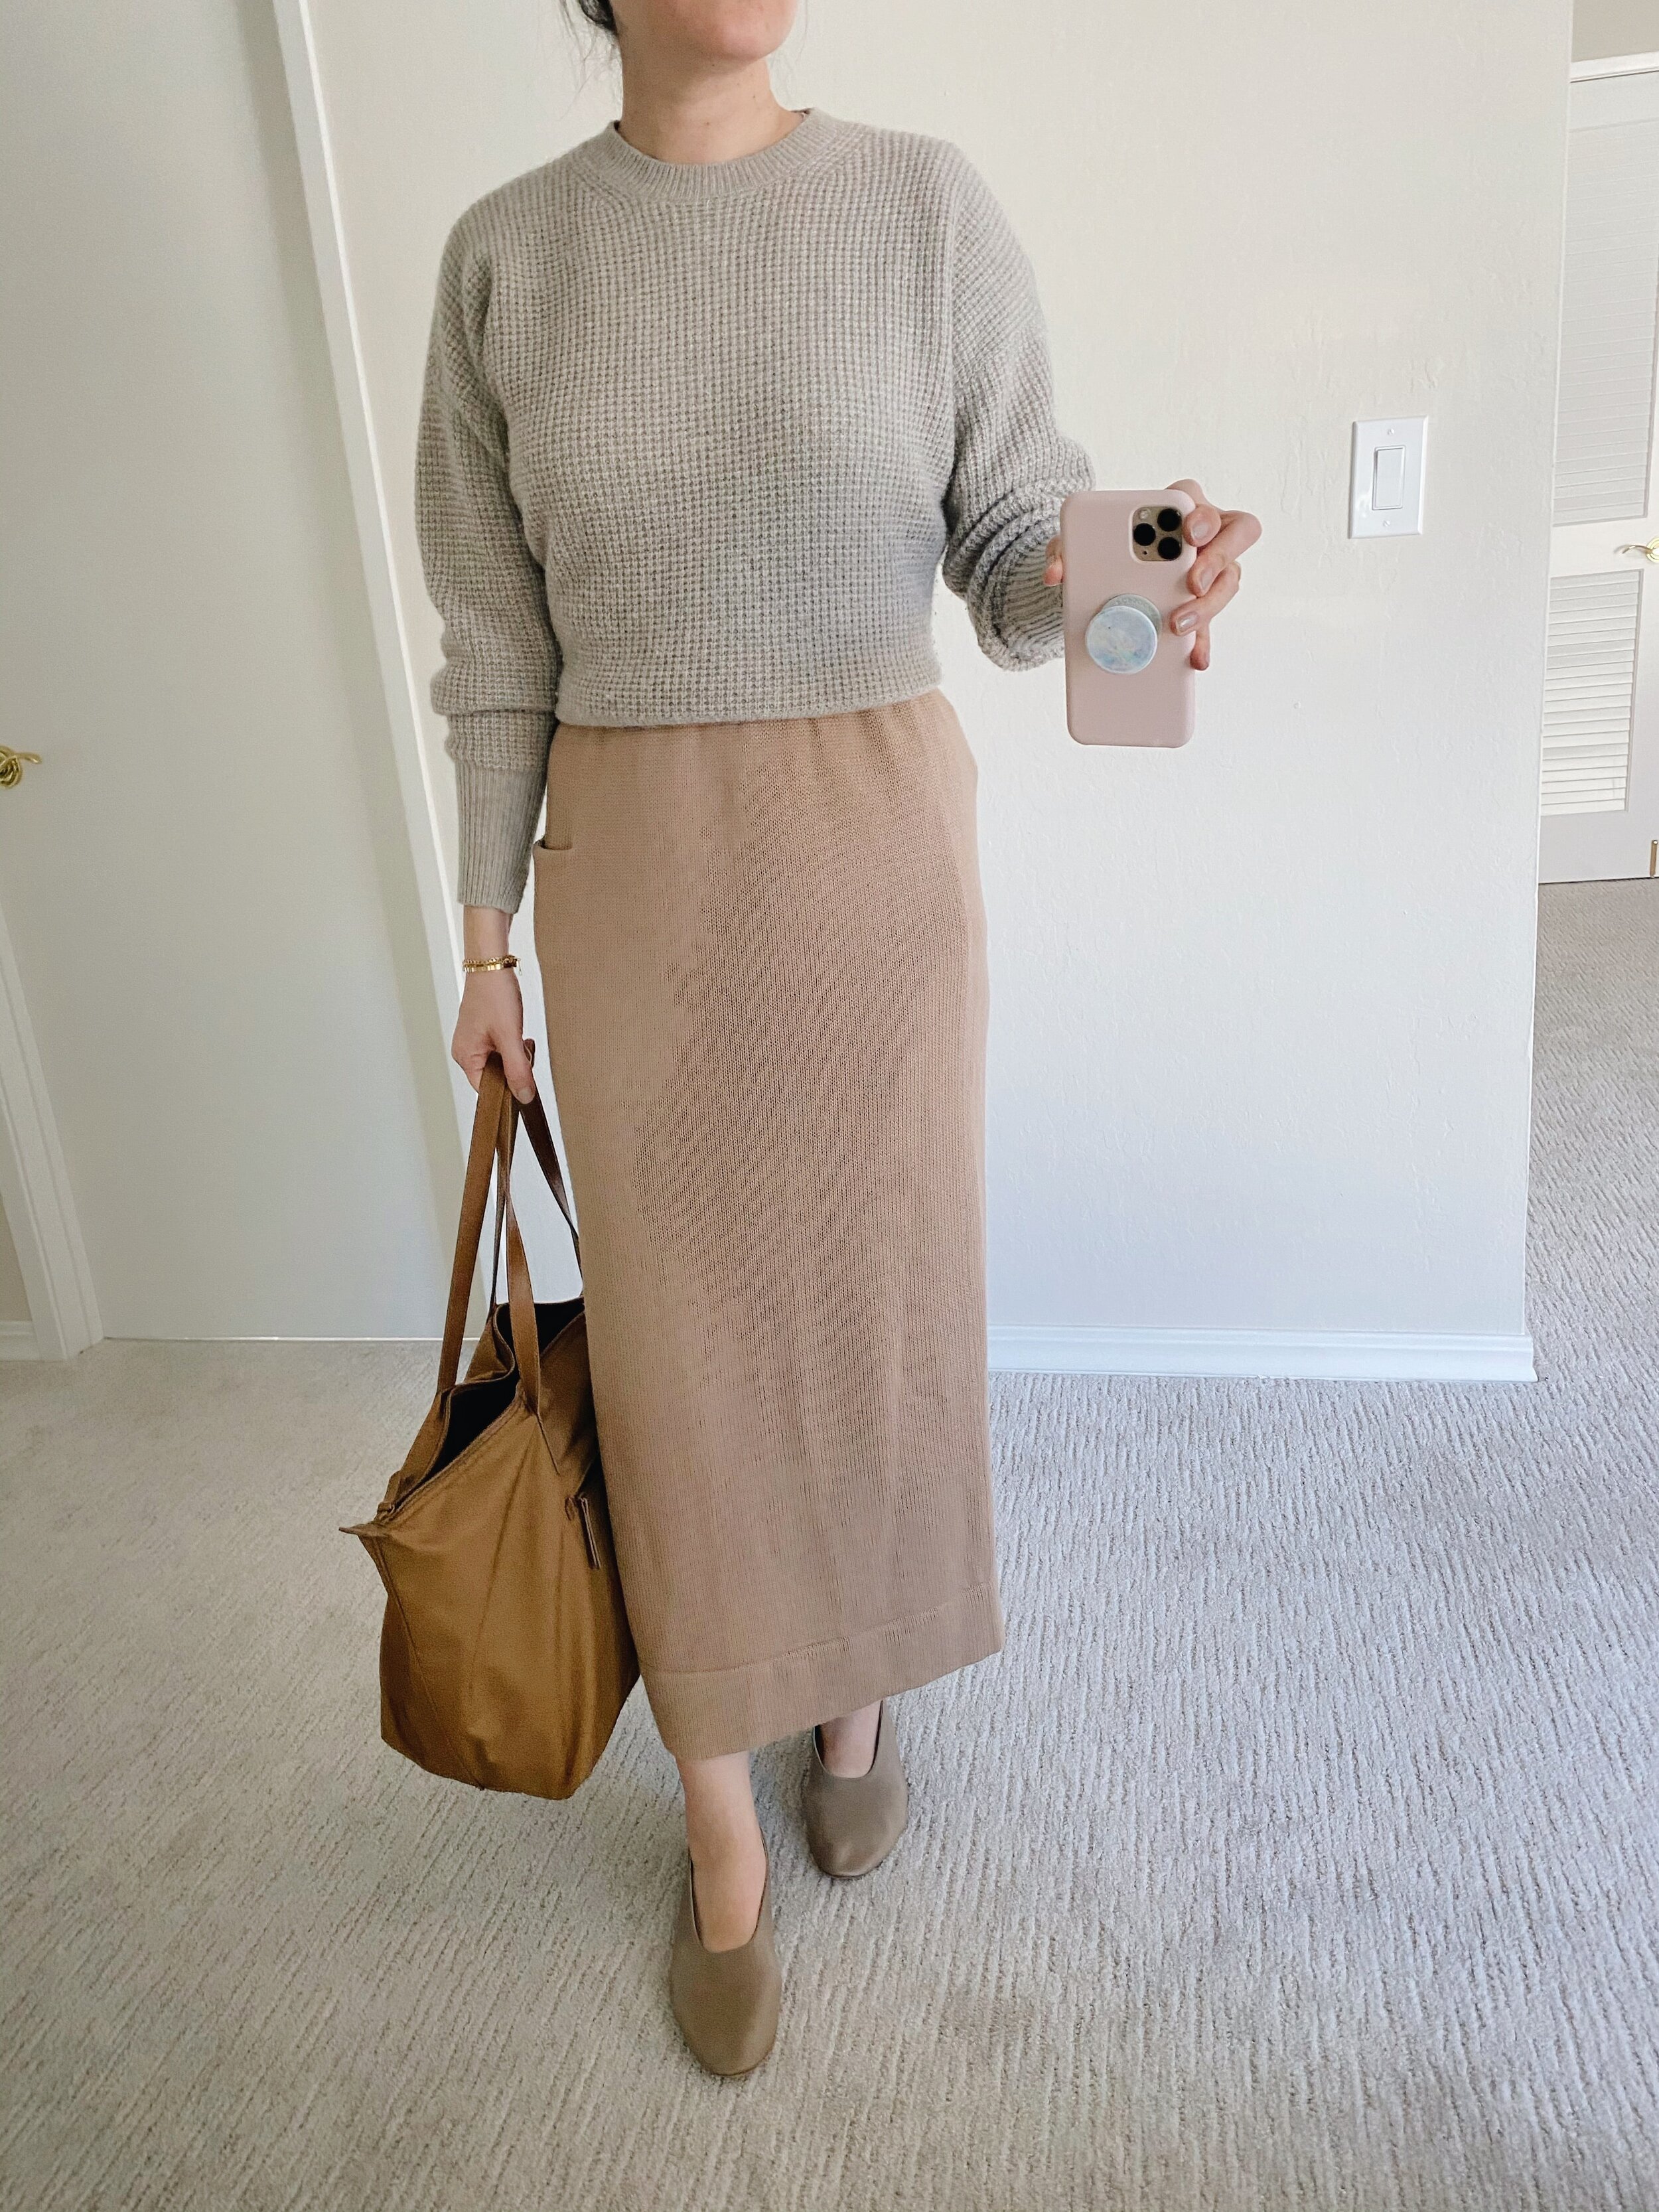 Everlane Review Dipped Zip Tote {Updated Feb 2018} — Fairly